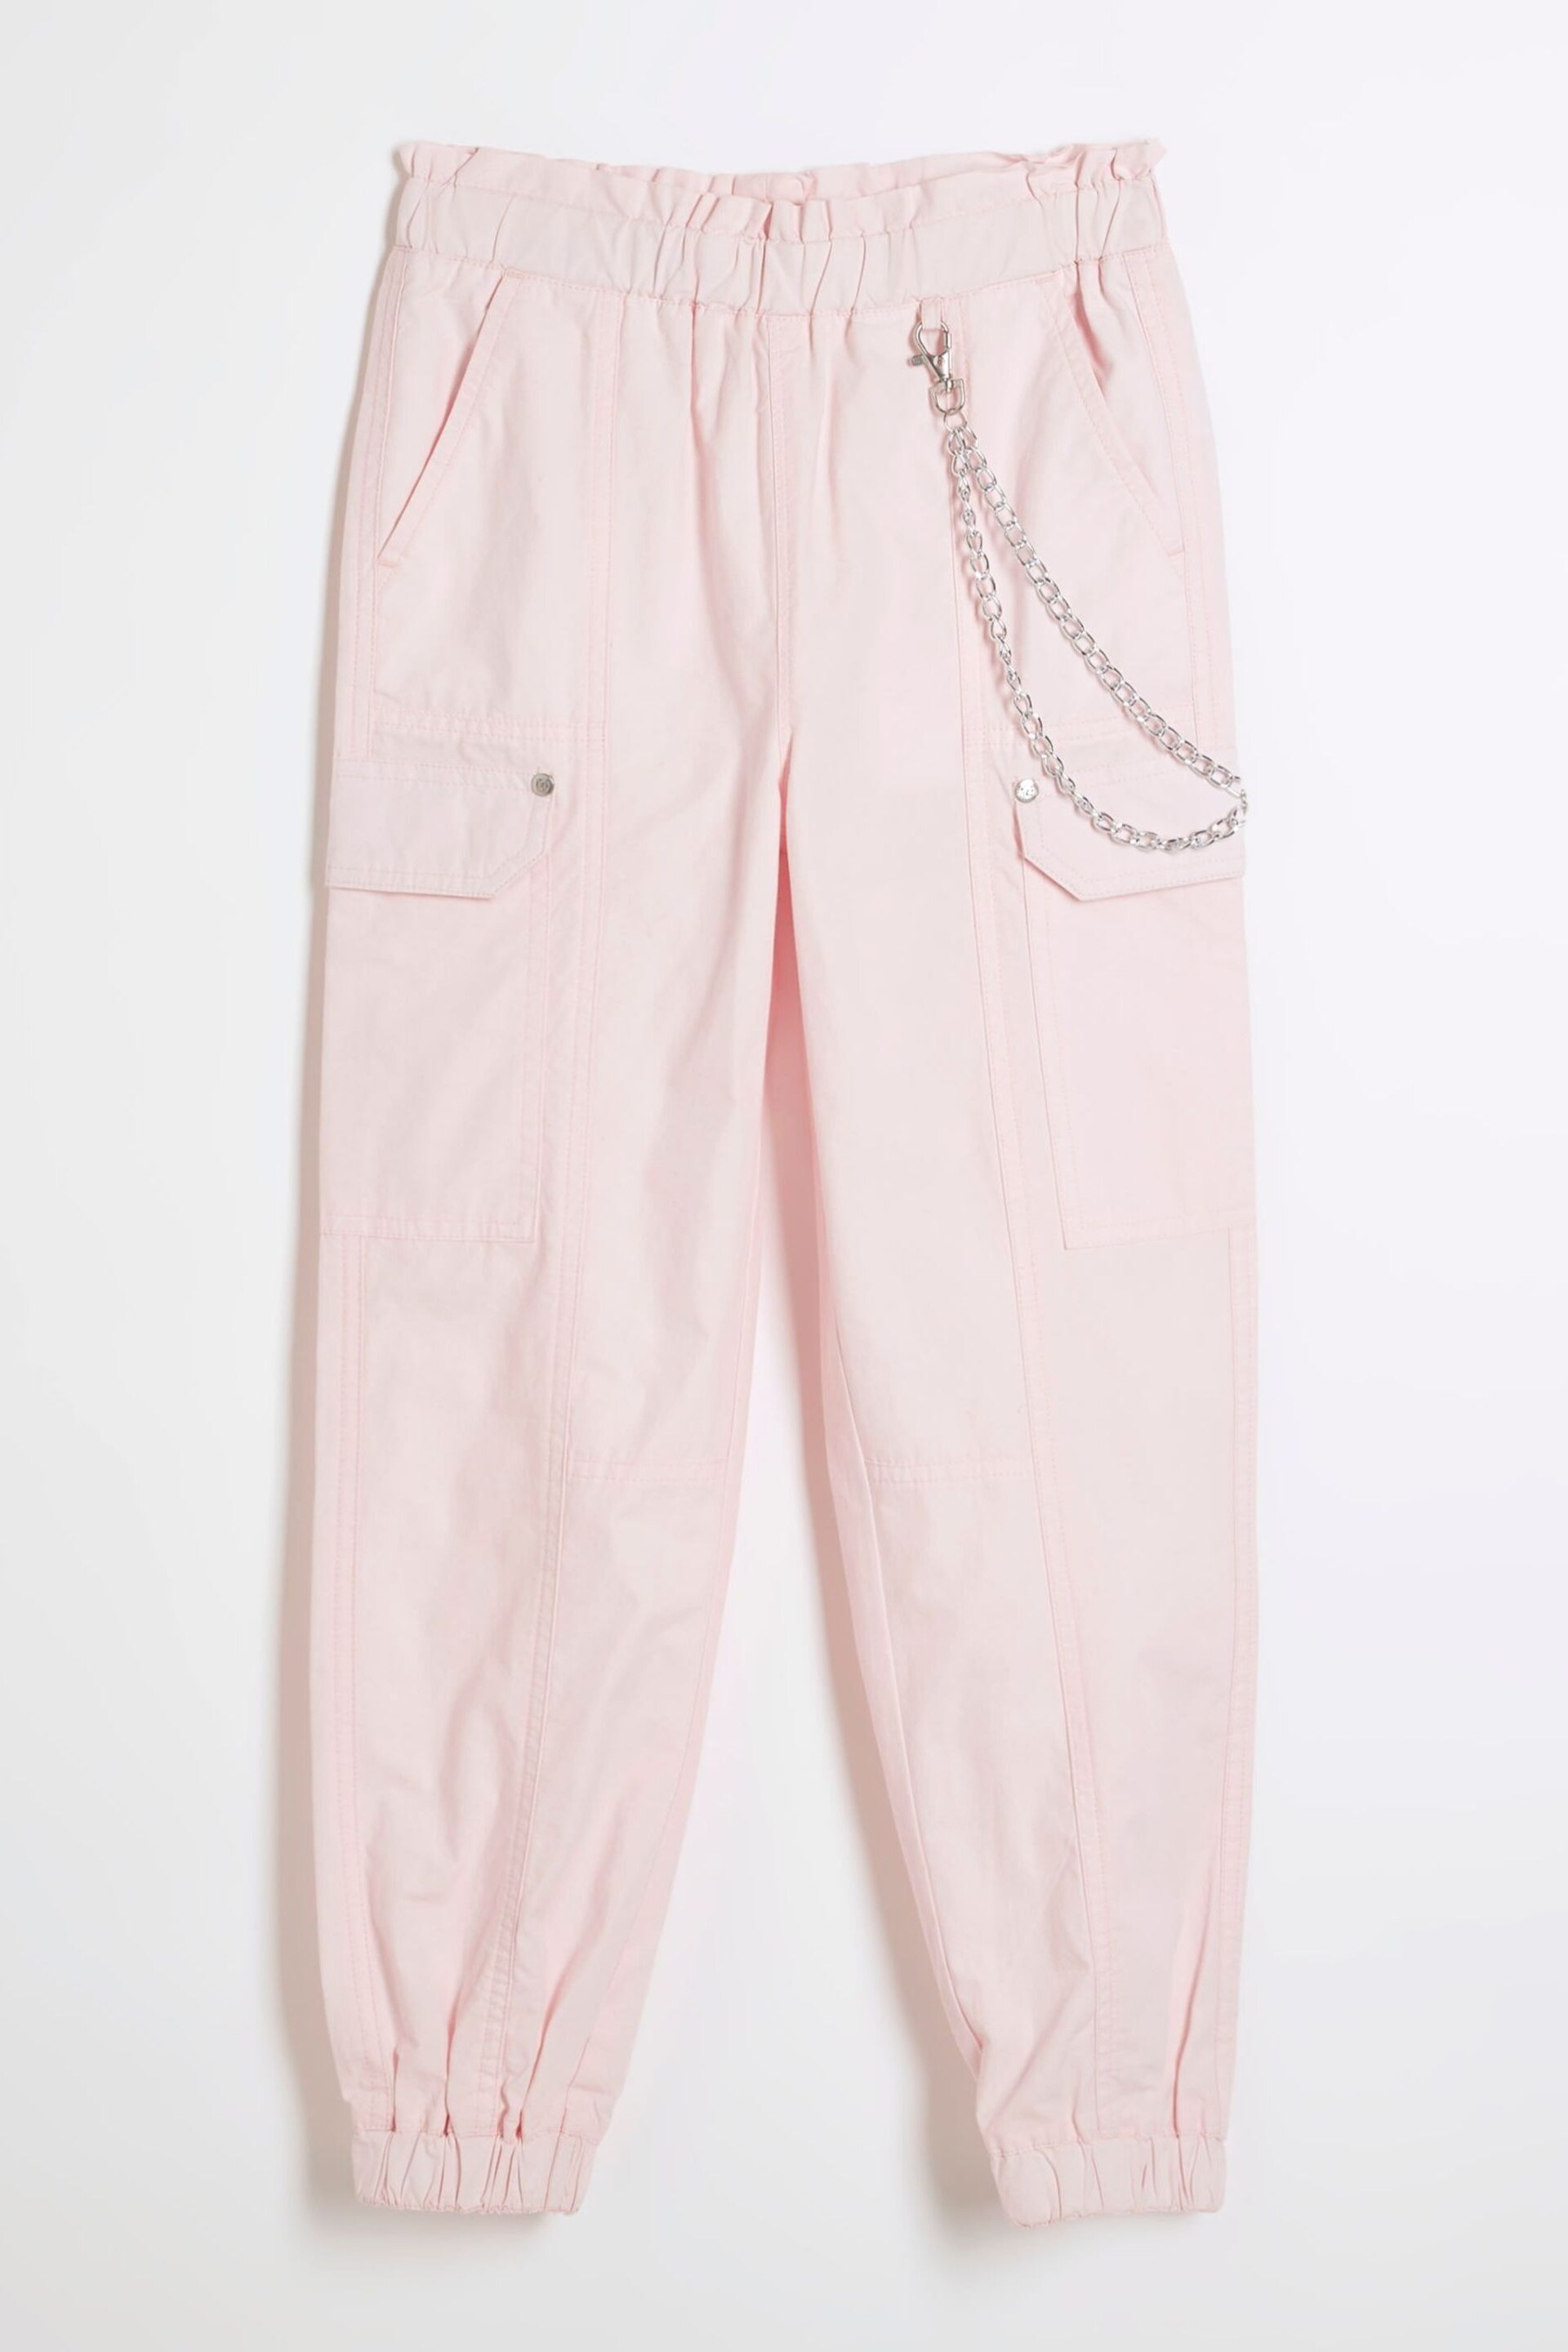 River Island Pink Girls Chain Trim Cargo Trousers - Image 1 of 3